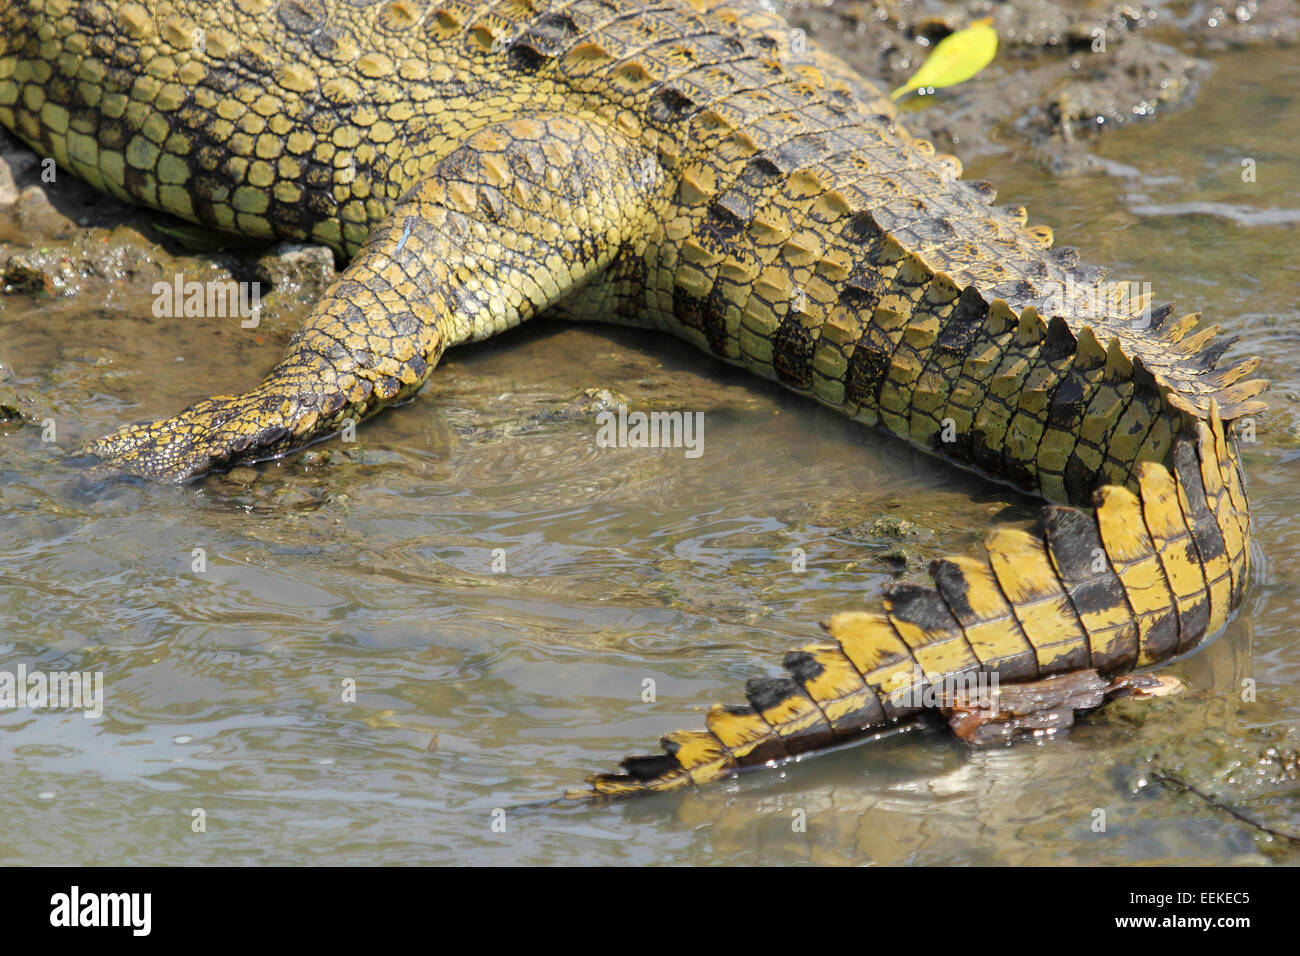 Closeup of the tail of a young Nile Crocodile, Crocodylus niloticus, resting near a river in Serengeti National Park, Tanzania Stock Photo